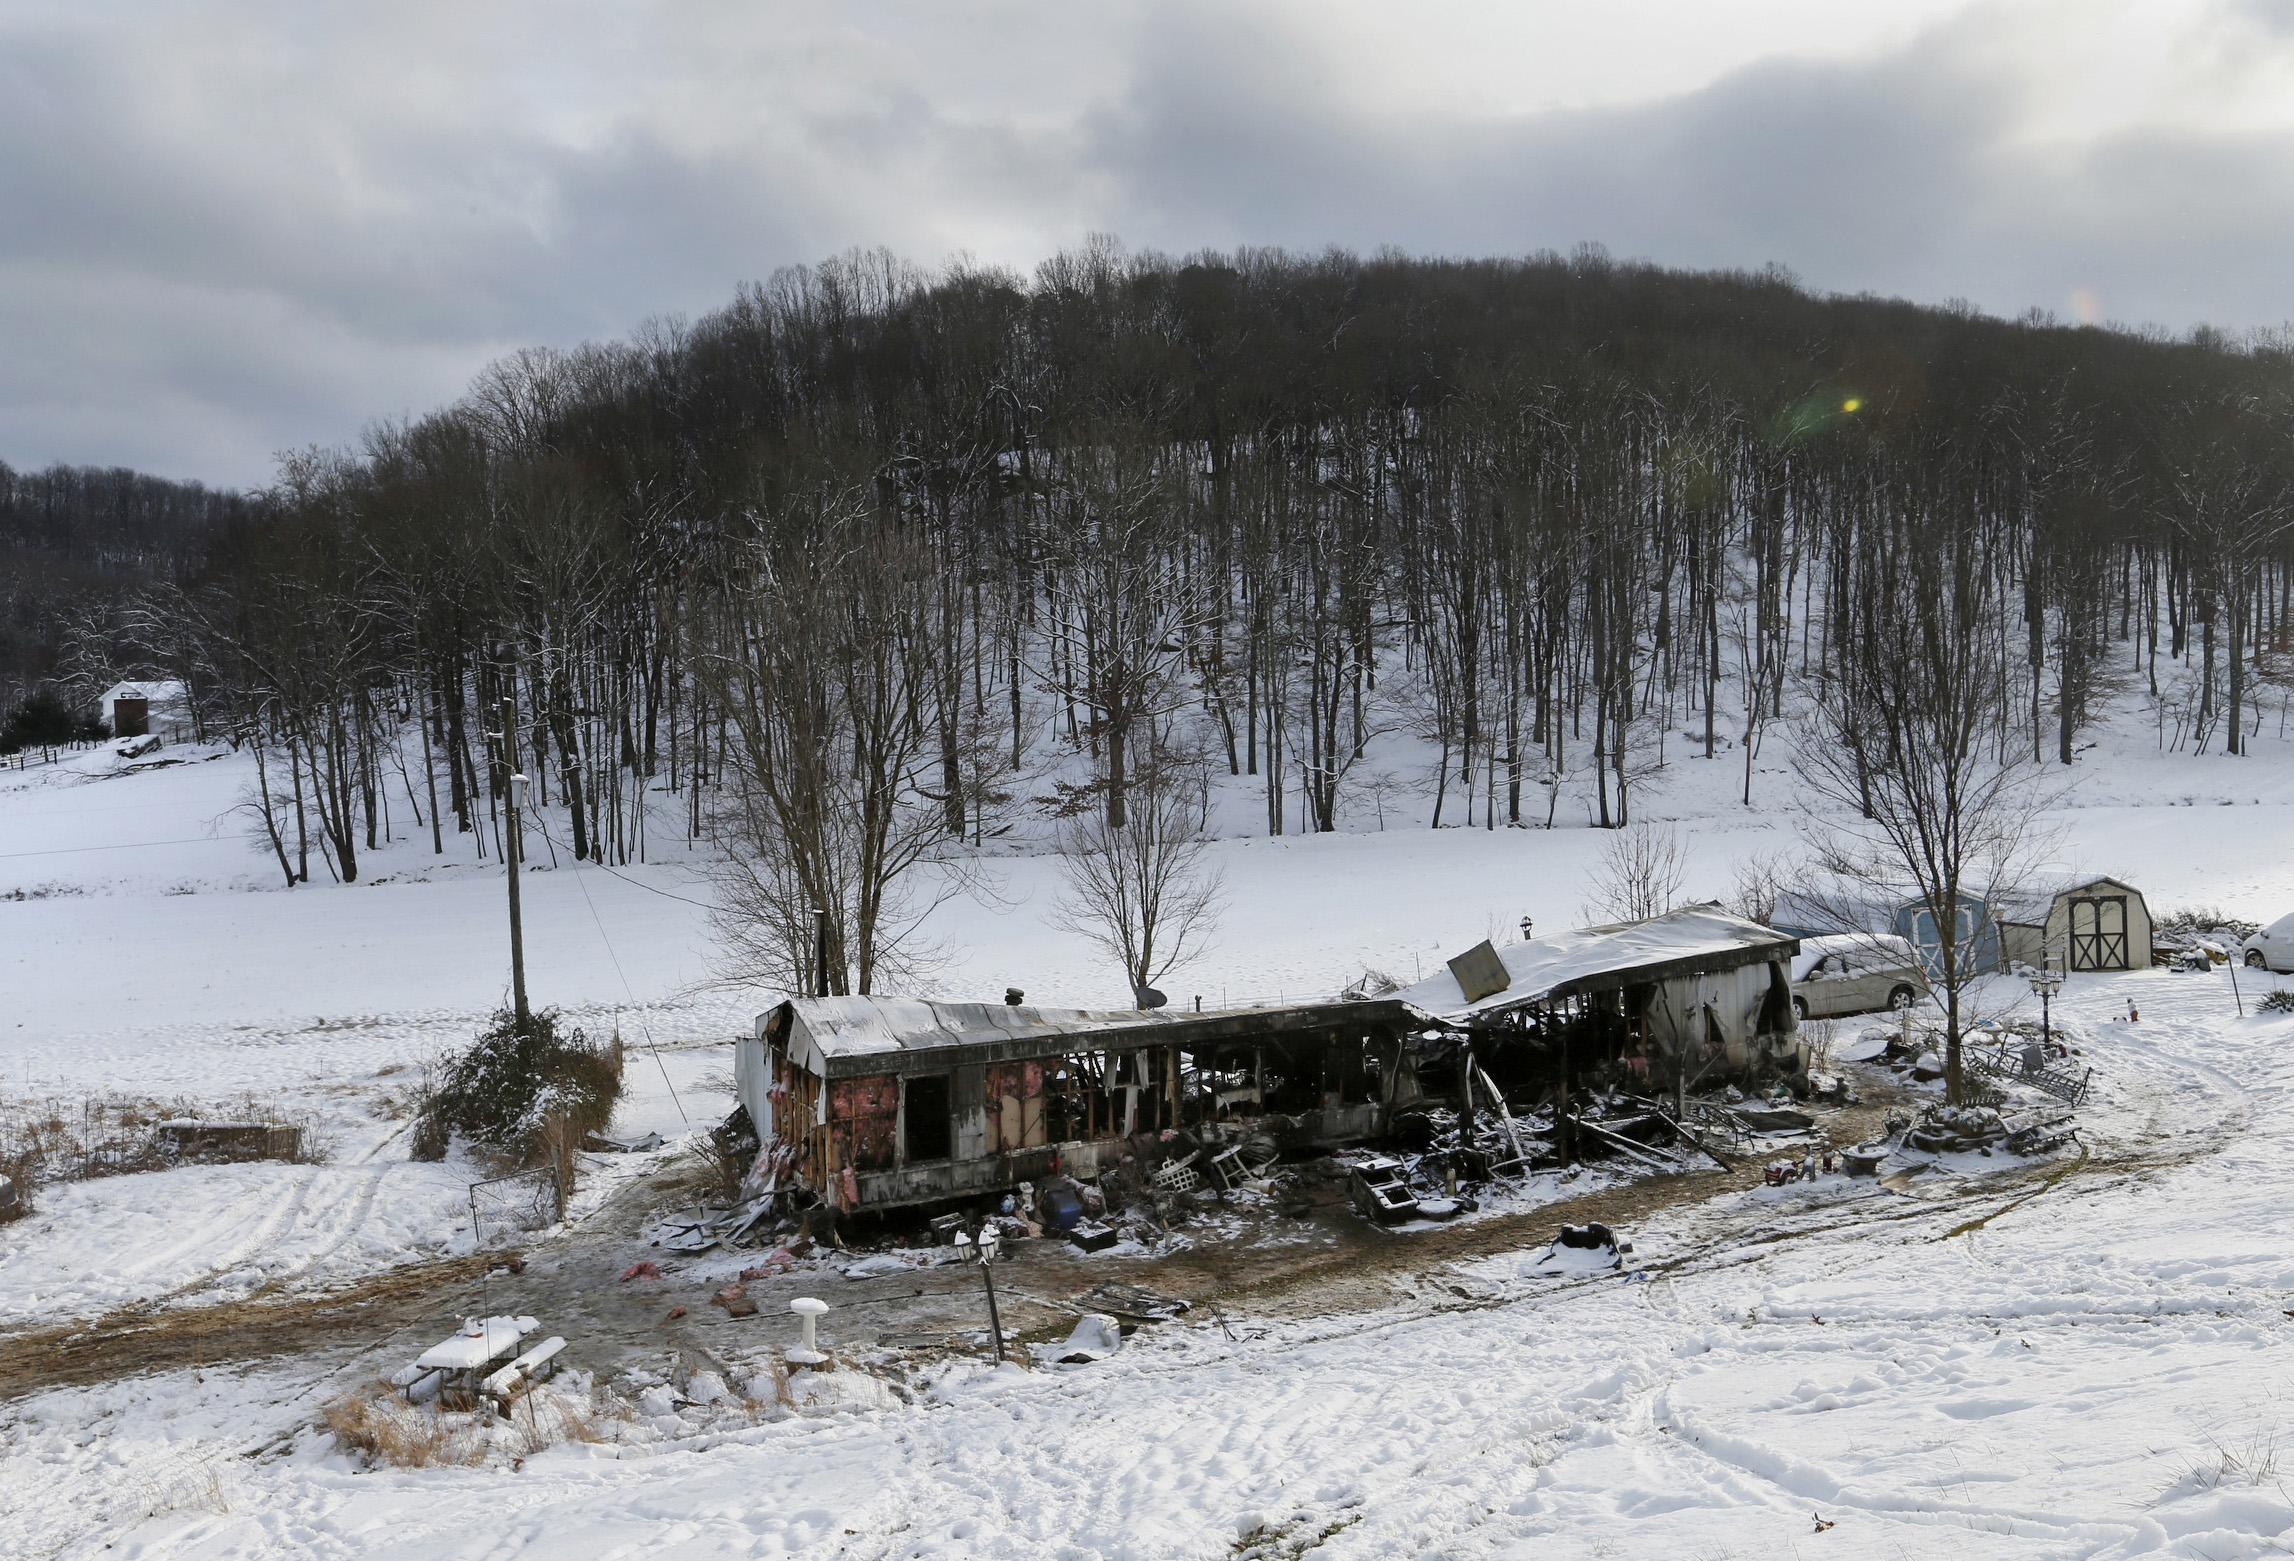 Woman in critical condition after Ohio fire kills 5 others The Blade